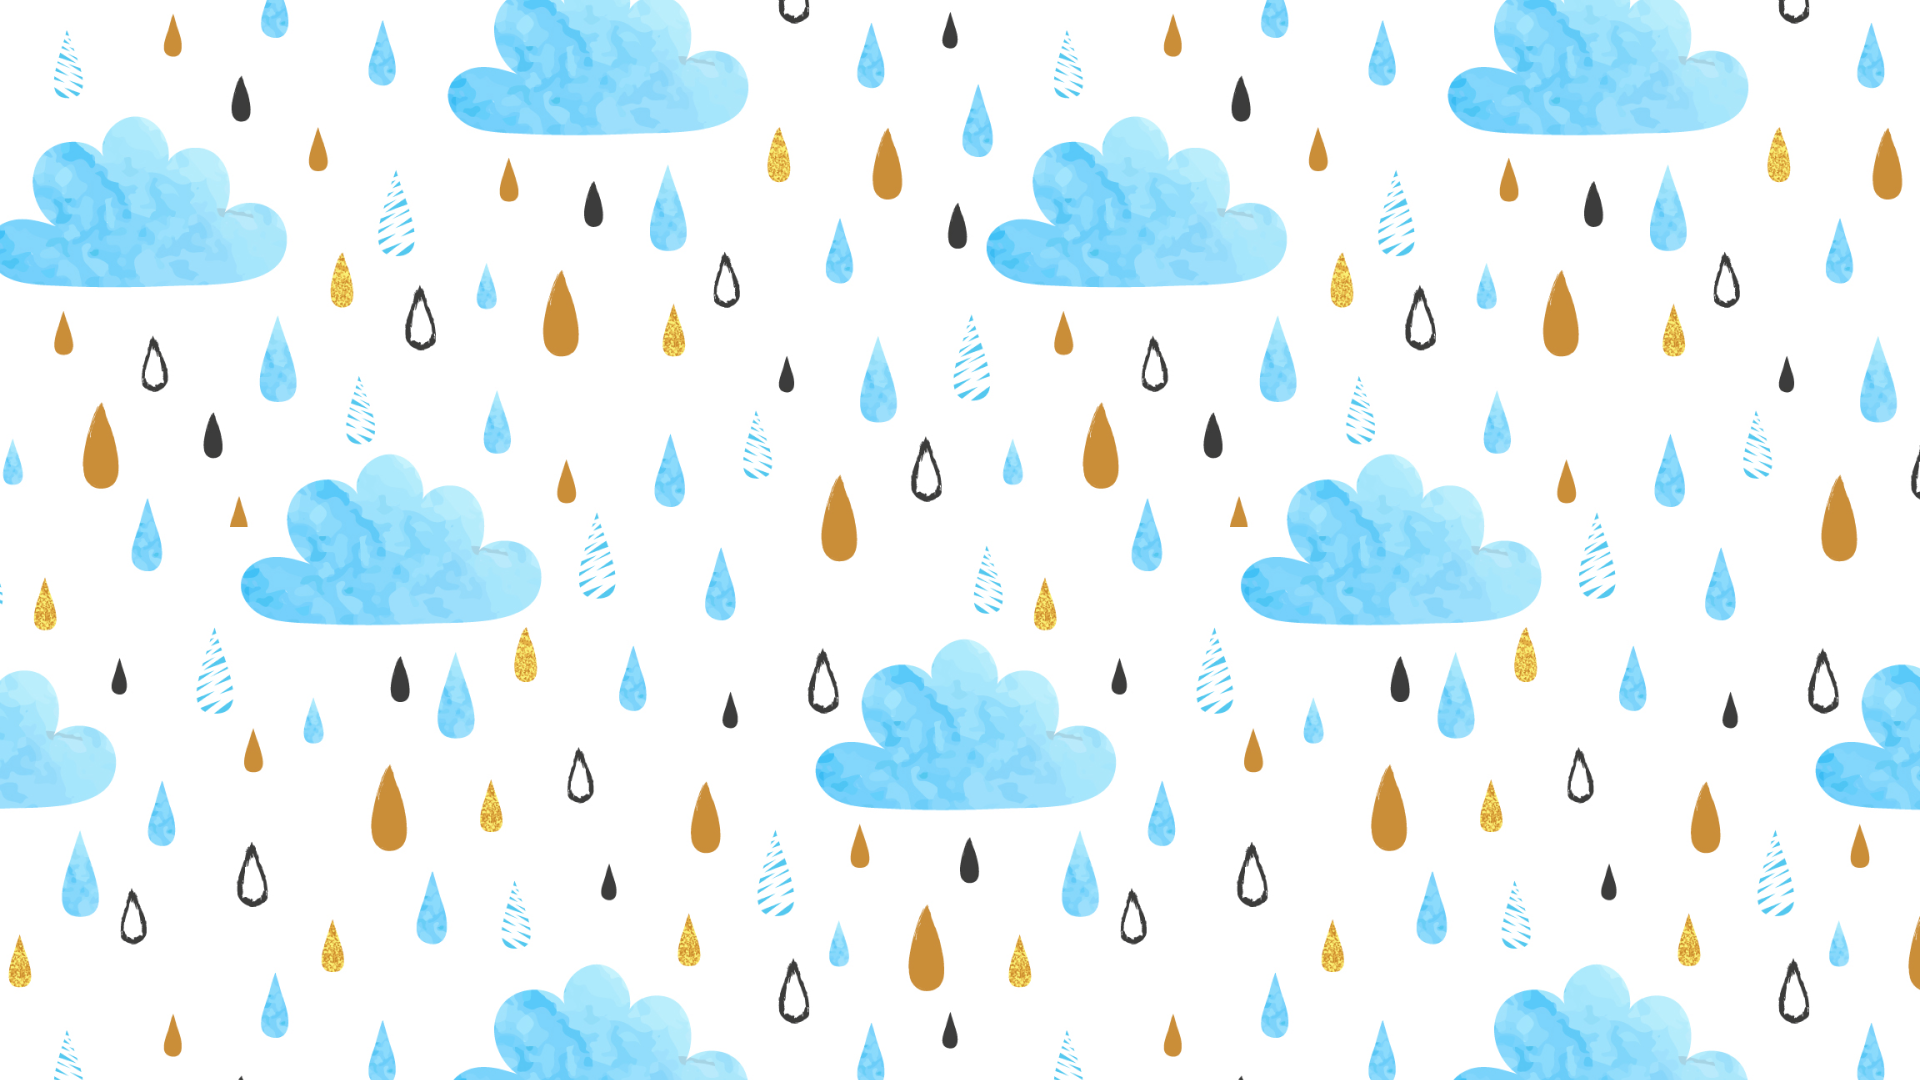 blue clouds with rain drops in gold, white, blue, and black